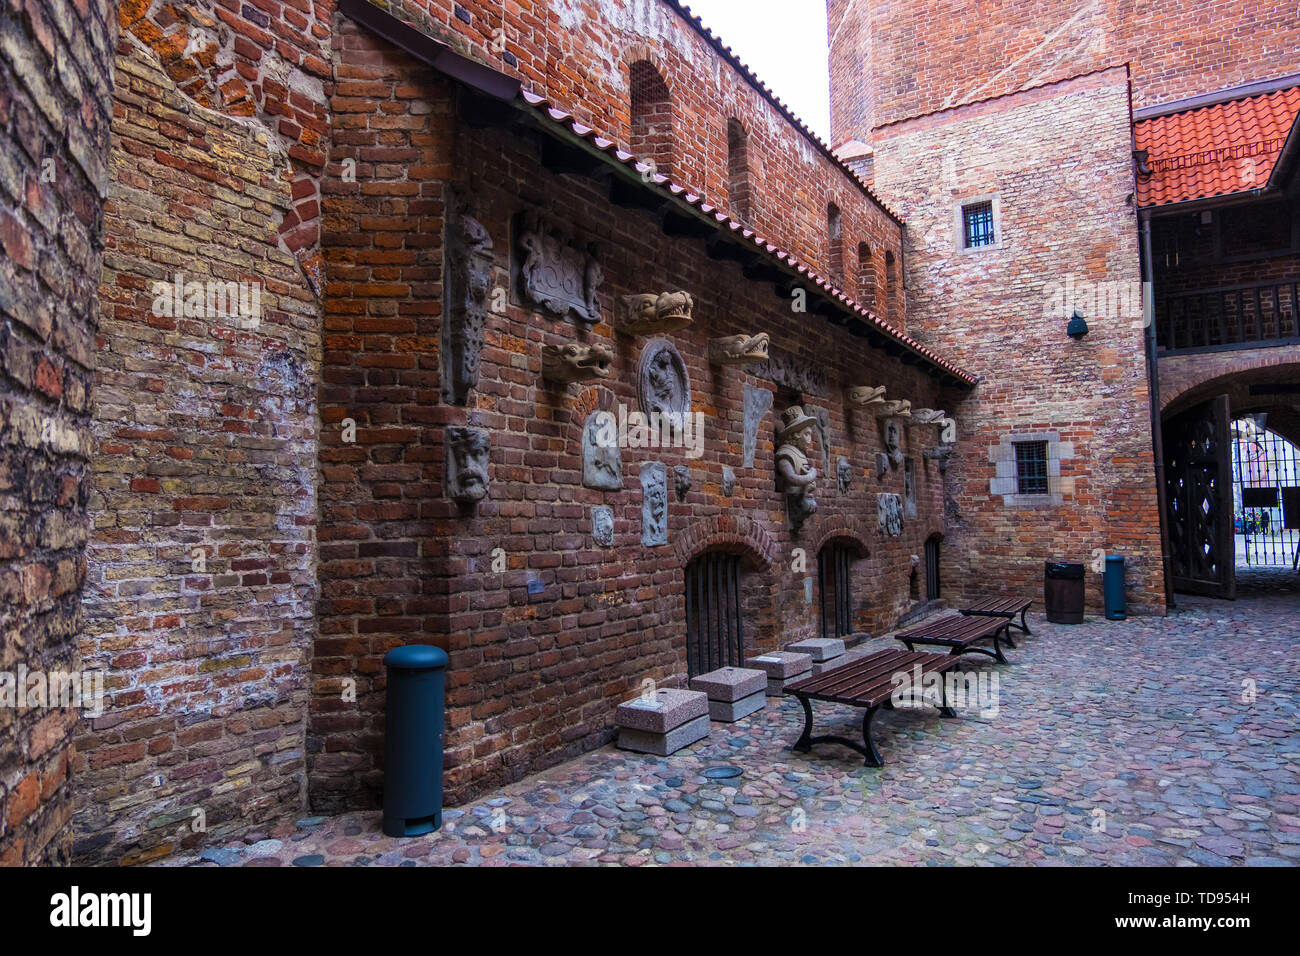 Gdansk, Poland - February 05, 2019: Torture House and Prison Tower in Main Town. Gdansk, Poland Stock Photo